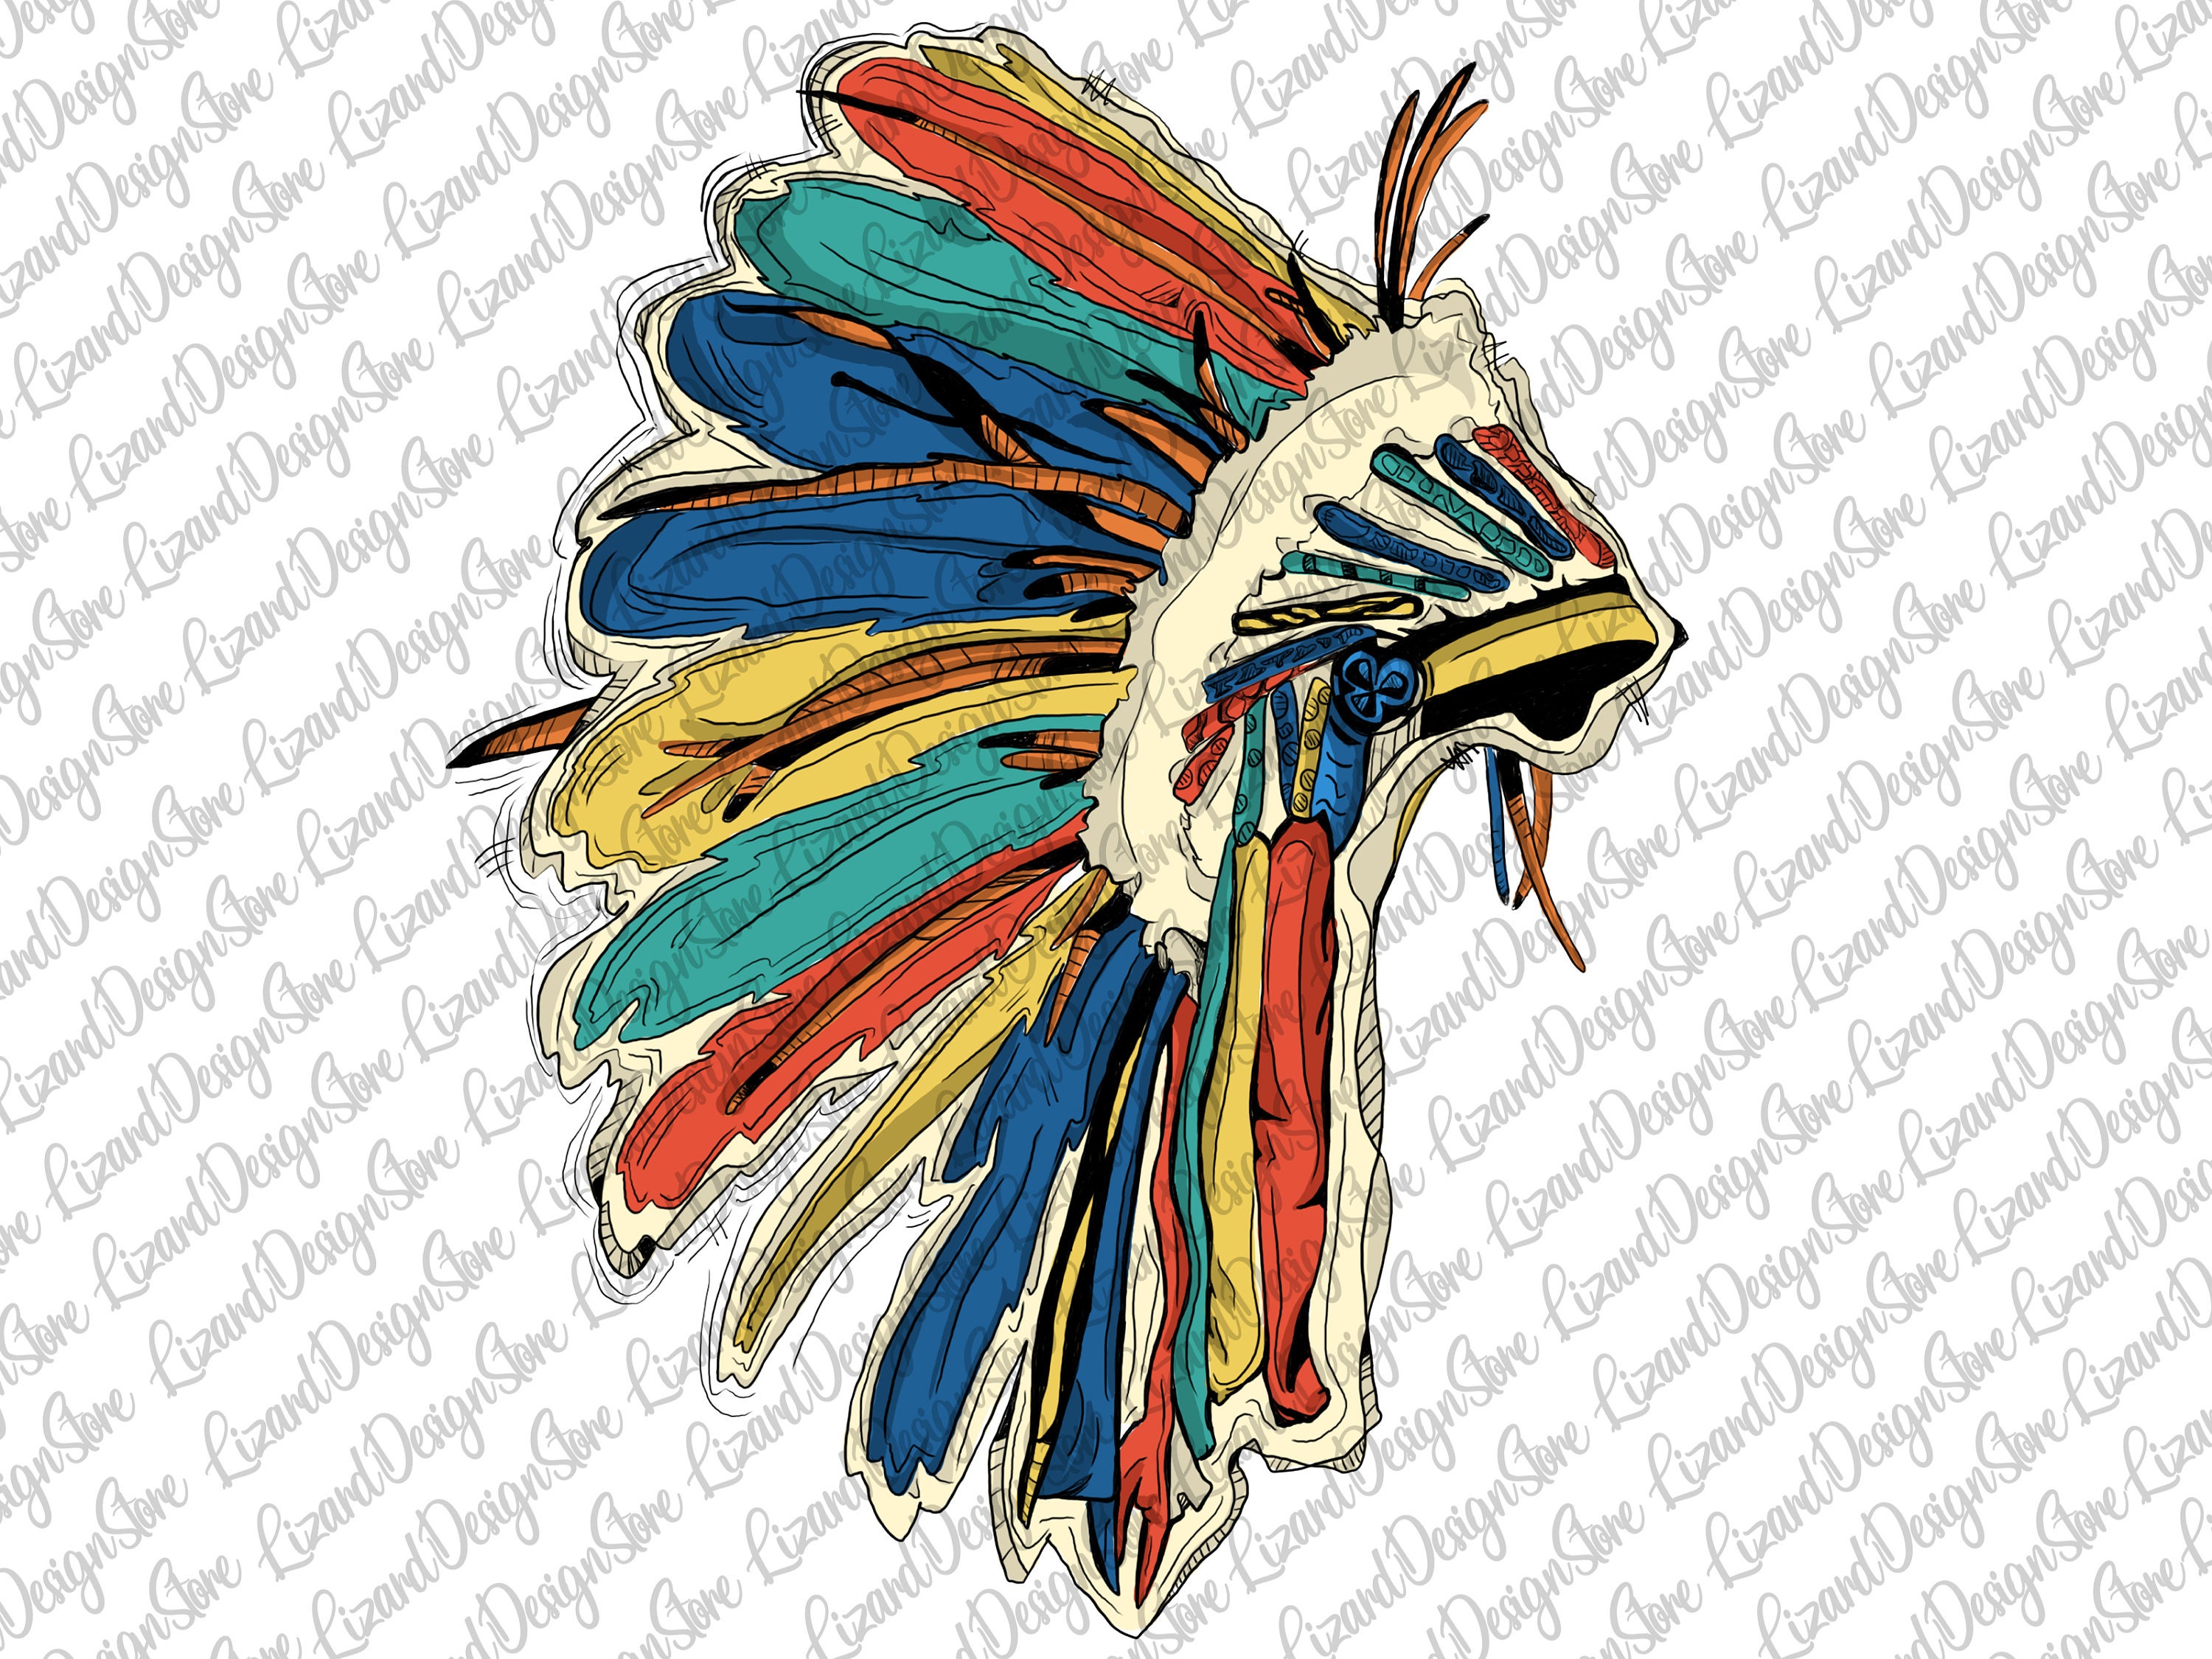 Indian Headdress White Yellow Red & Black Feather Warbonnet Native American  Feathers Hat Festival Costume Indian Hat Short Length 